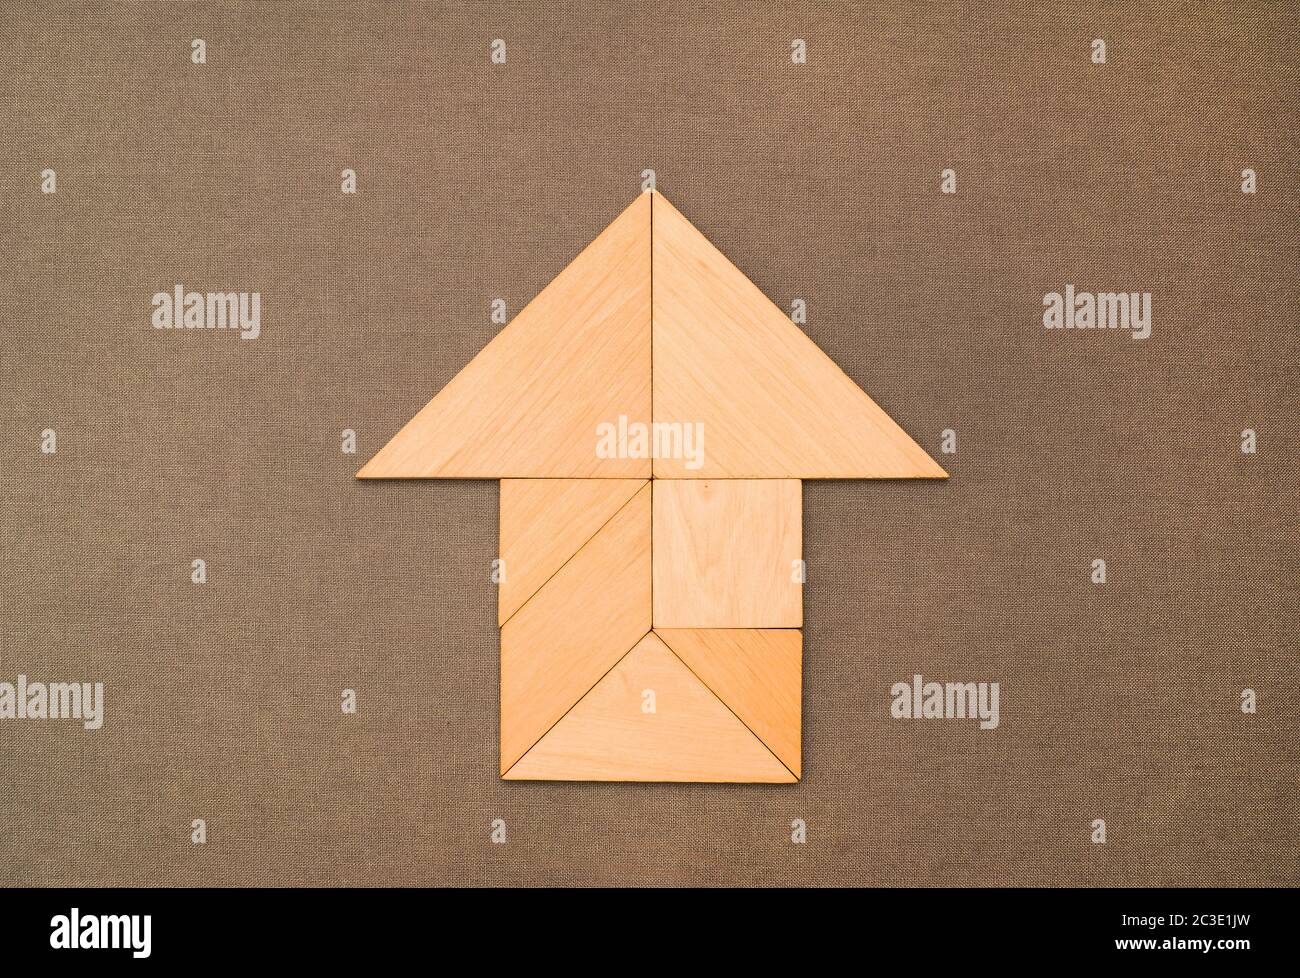 Flat lay - pictogram, symbol, icon of house and arrow made of wooden tangram pieces. Unicolor background made of grey fabric texture. Stock Photo